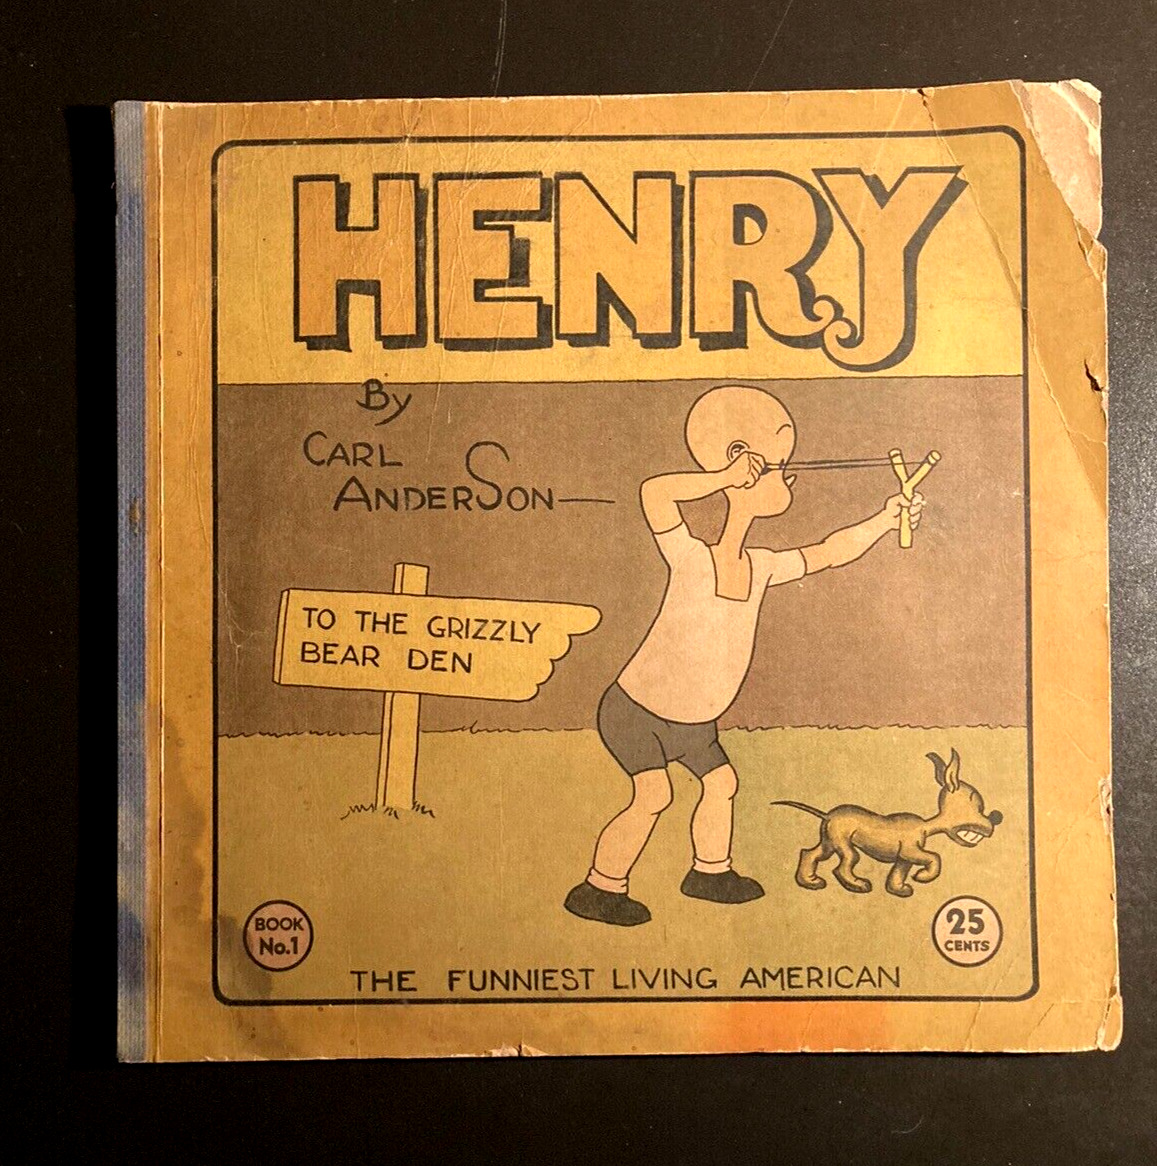 1935 HENRY Book No. 1 Comic Book by Carl Anderson RARE COMIC Nice Strong Binder